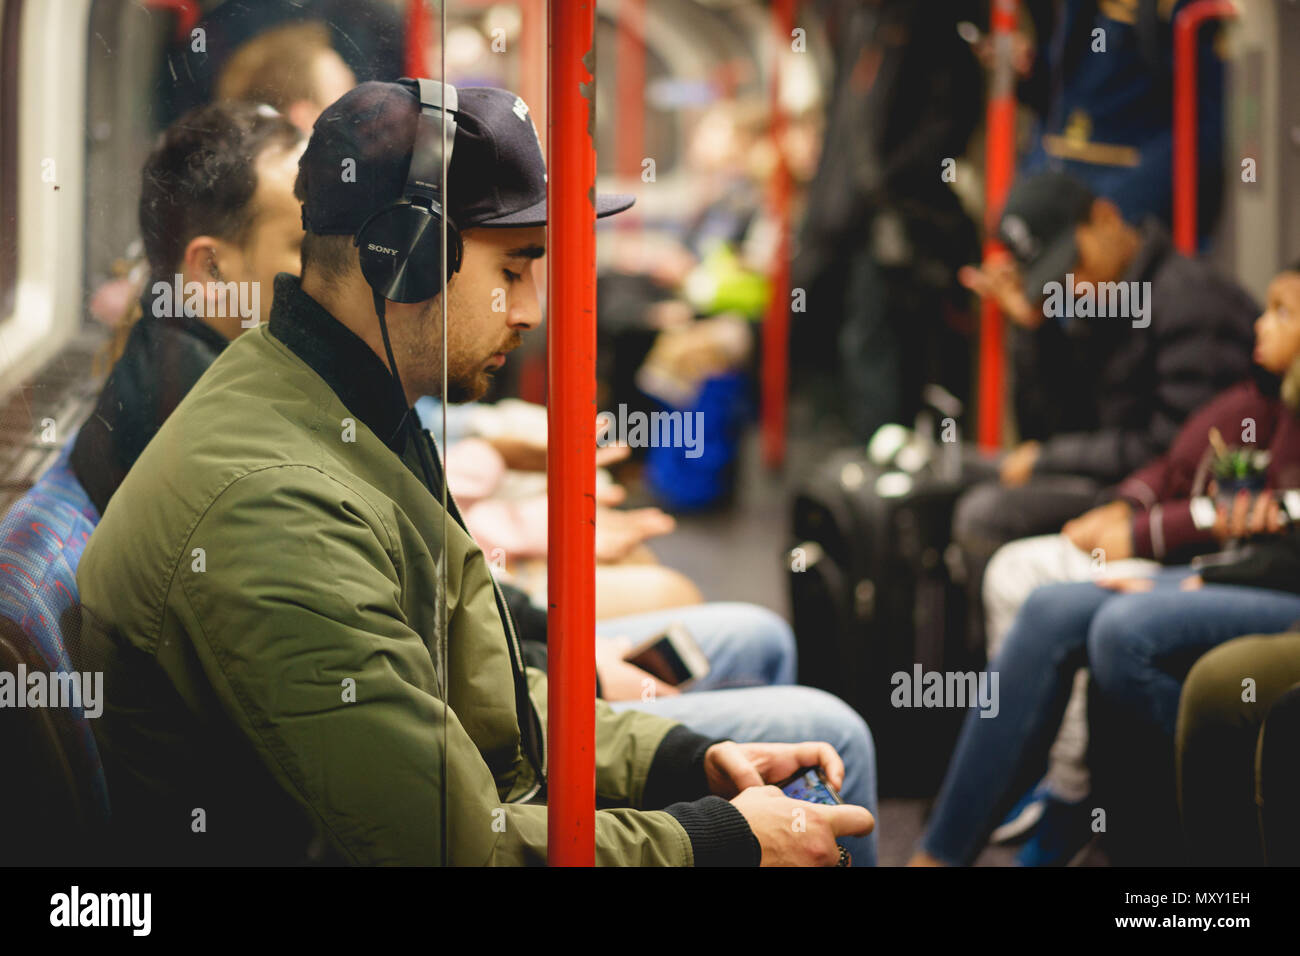 London, UK - October 2017. People commuting on an underground train in London. The Tube handles up to 5 Million passenger per day. Landscape format. Stock Photo